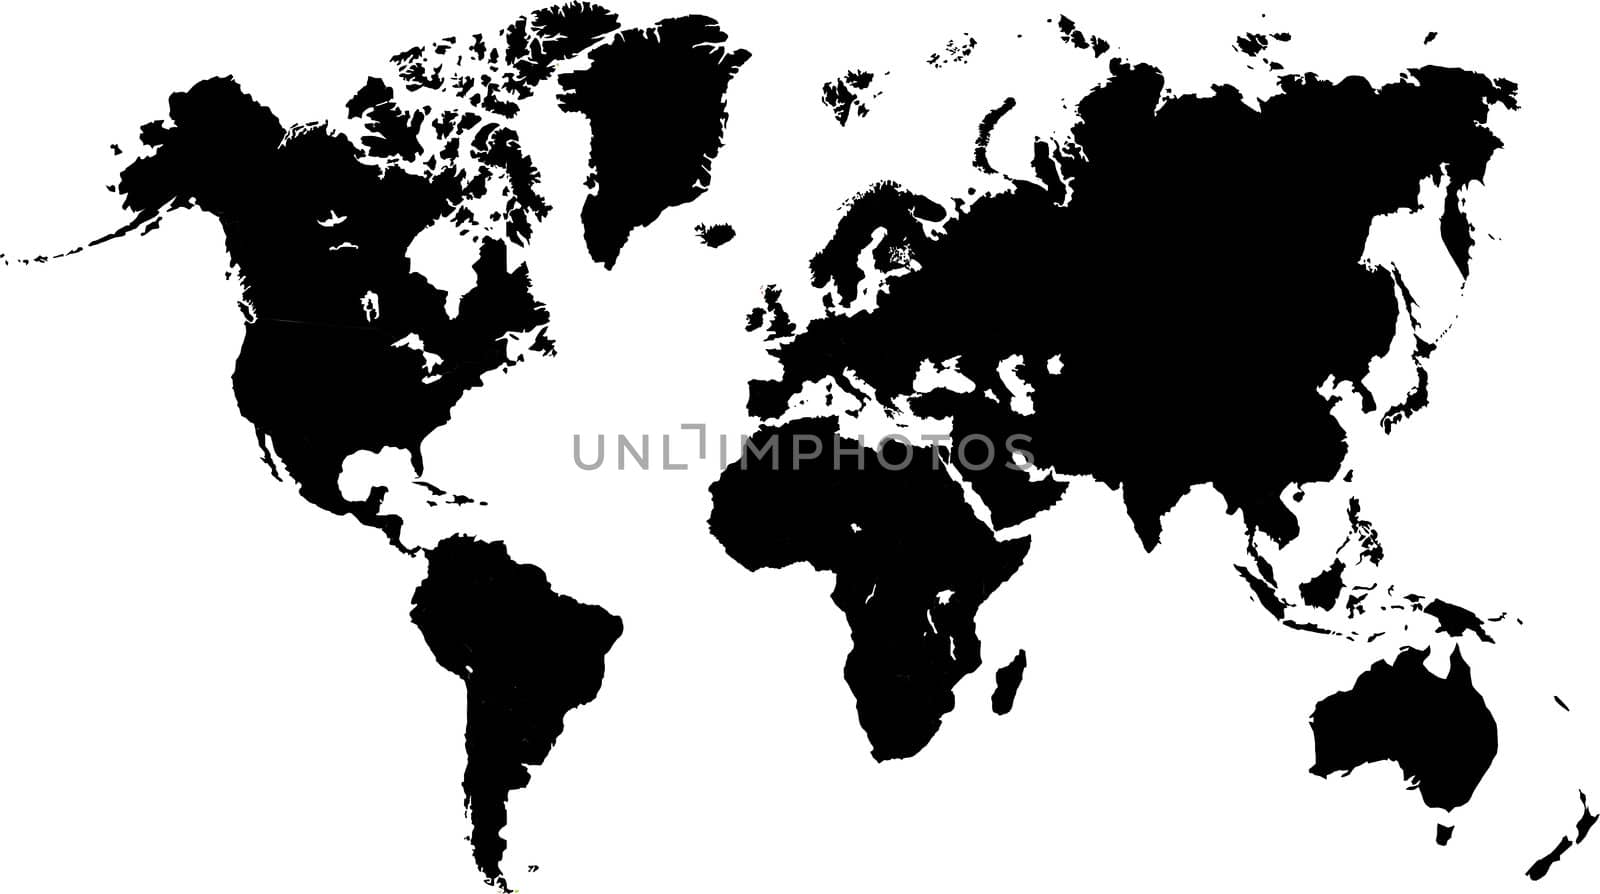 an unfolded map of the world. world map illustration.